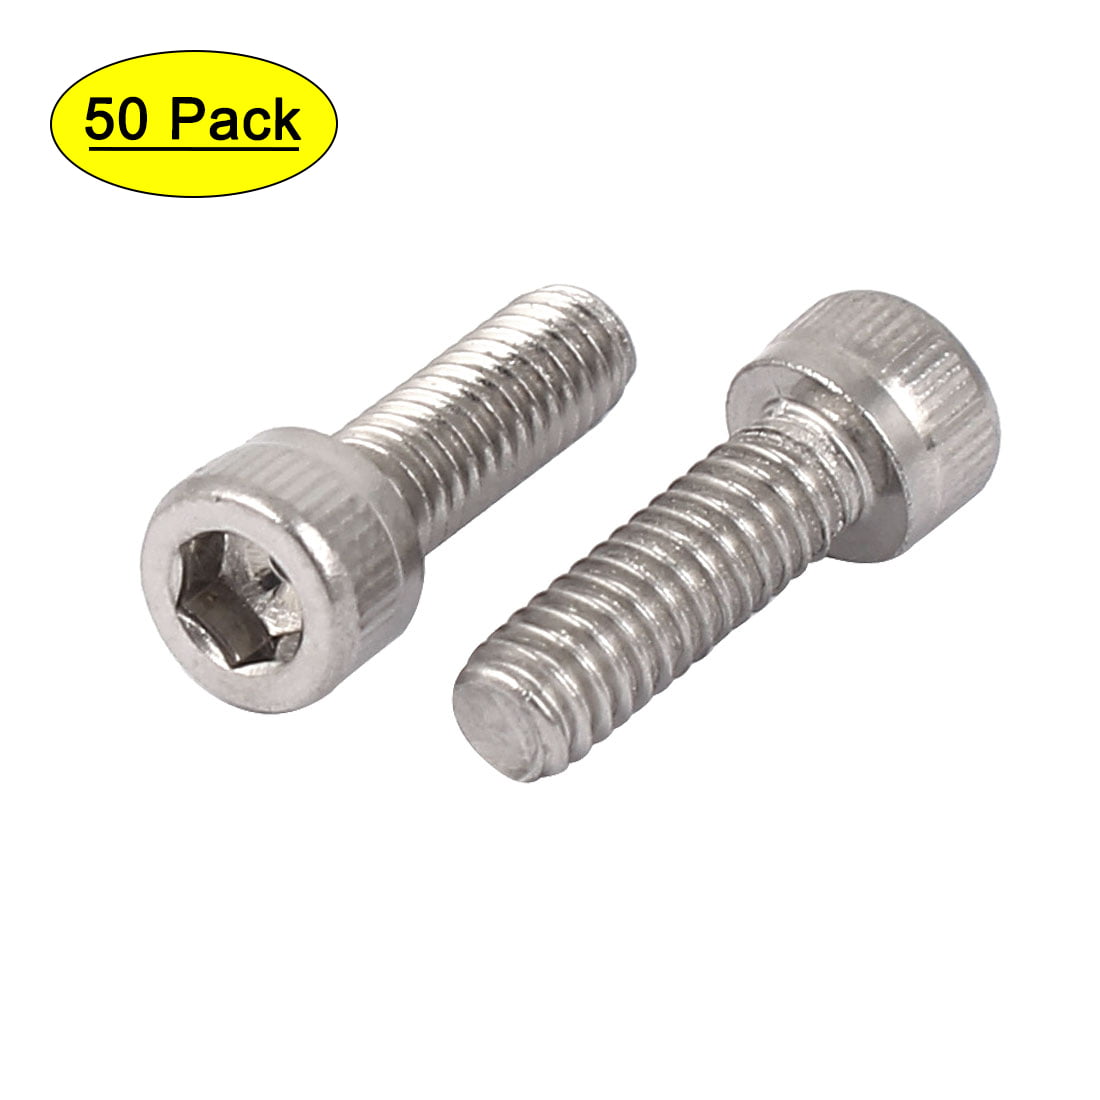 Hot sale 50 Pcs 304 Stainless Steel Hex Nuts Hexagon Nuts M1.6,M2,M2.5 RS 